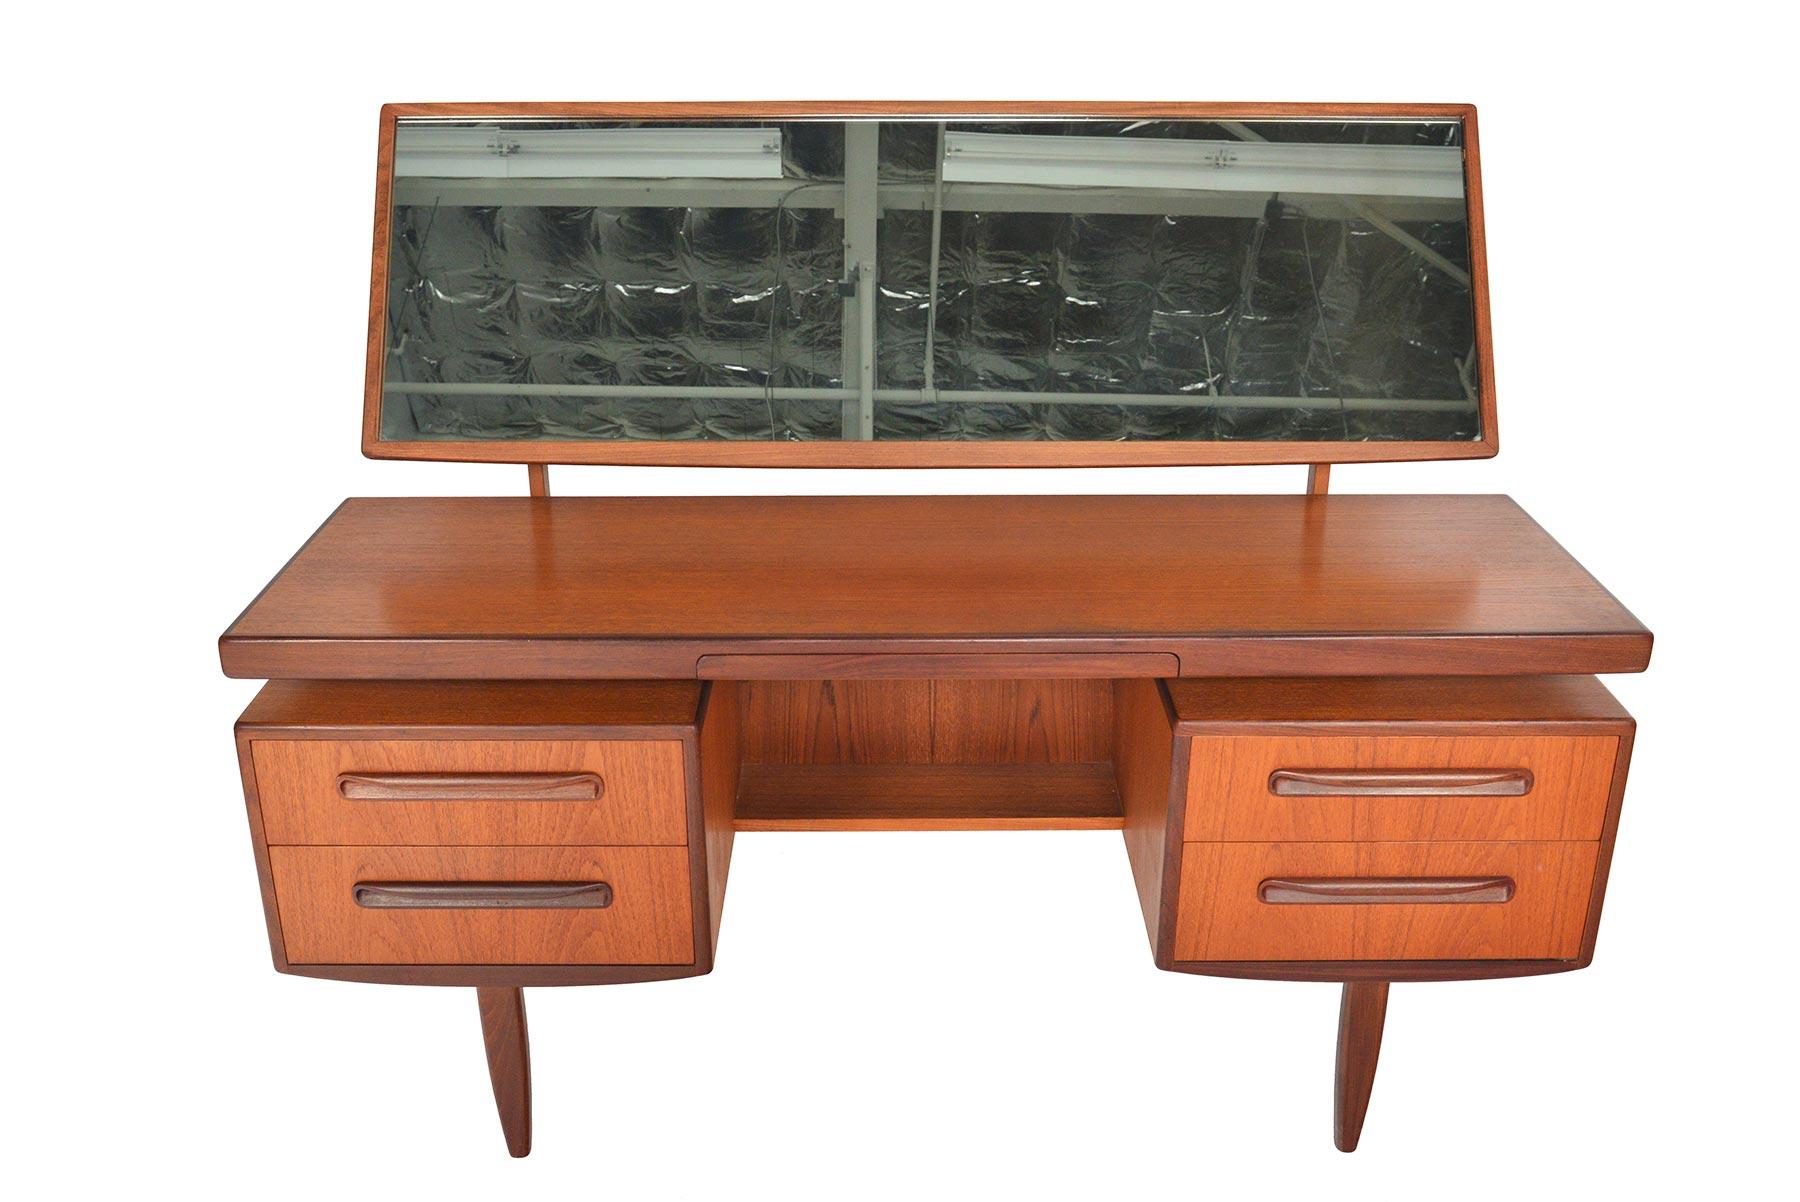 This English Mid-Century Modern G Plan Fresco floating top teak vanity desk was designed by Victor Wilkins in the 1960s. Mirror articulates and easily detaches for storage. Middle drawer pulls out to reveal a deep, velvet lined jewelry drawer. Two